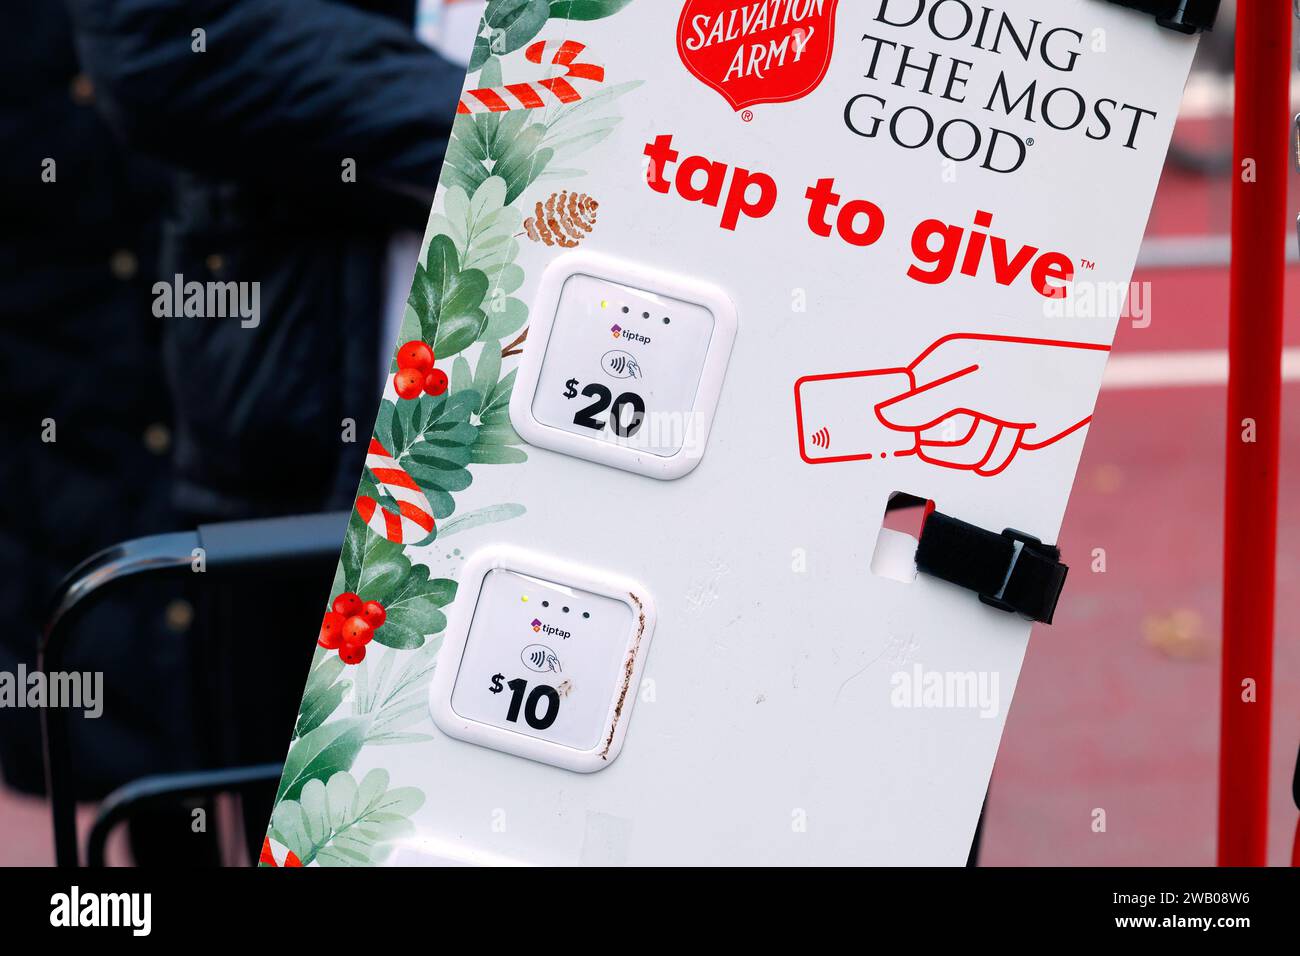 Tiptap touchless contactless payment credit card donation options at a Salvation Army Christmas Red Kettle fundraiser on a New York City sidewalk. Stock Photo